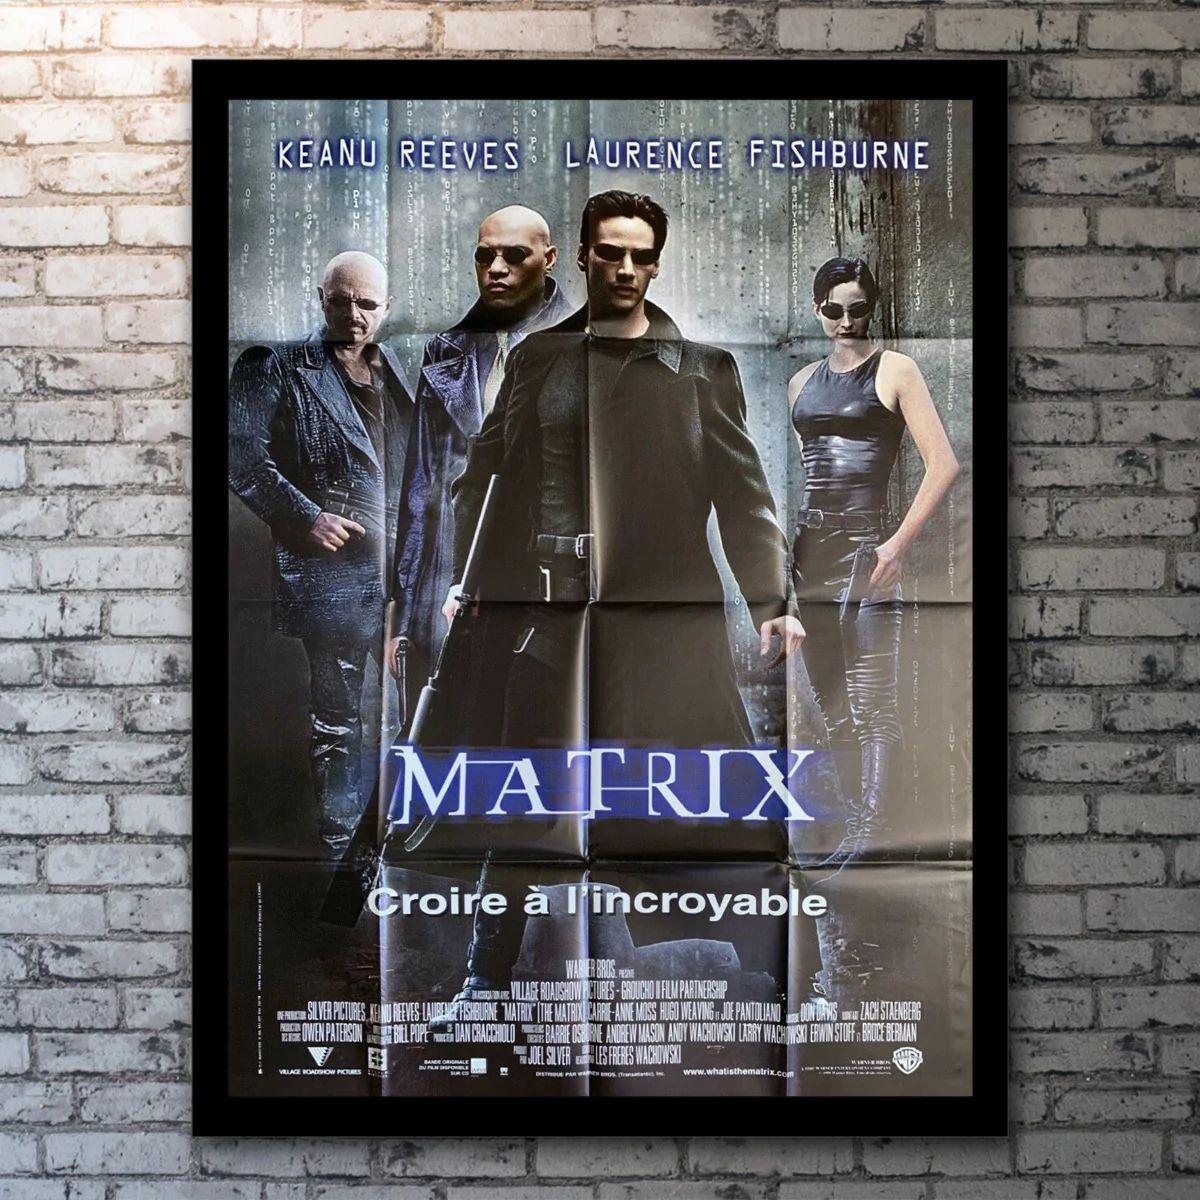 The Matrix, Unframed Poster, 1999

Original One Panel (47 X 63 Inches). When a beautiful stranger leads computer hacker Neo to a forbidding underworld, he discovers the shocking truth--the life he knows is the elaborate deception of an evil